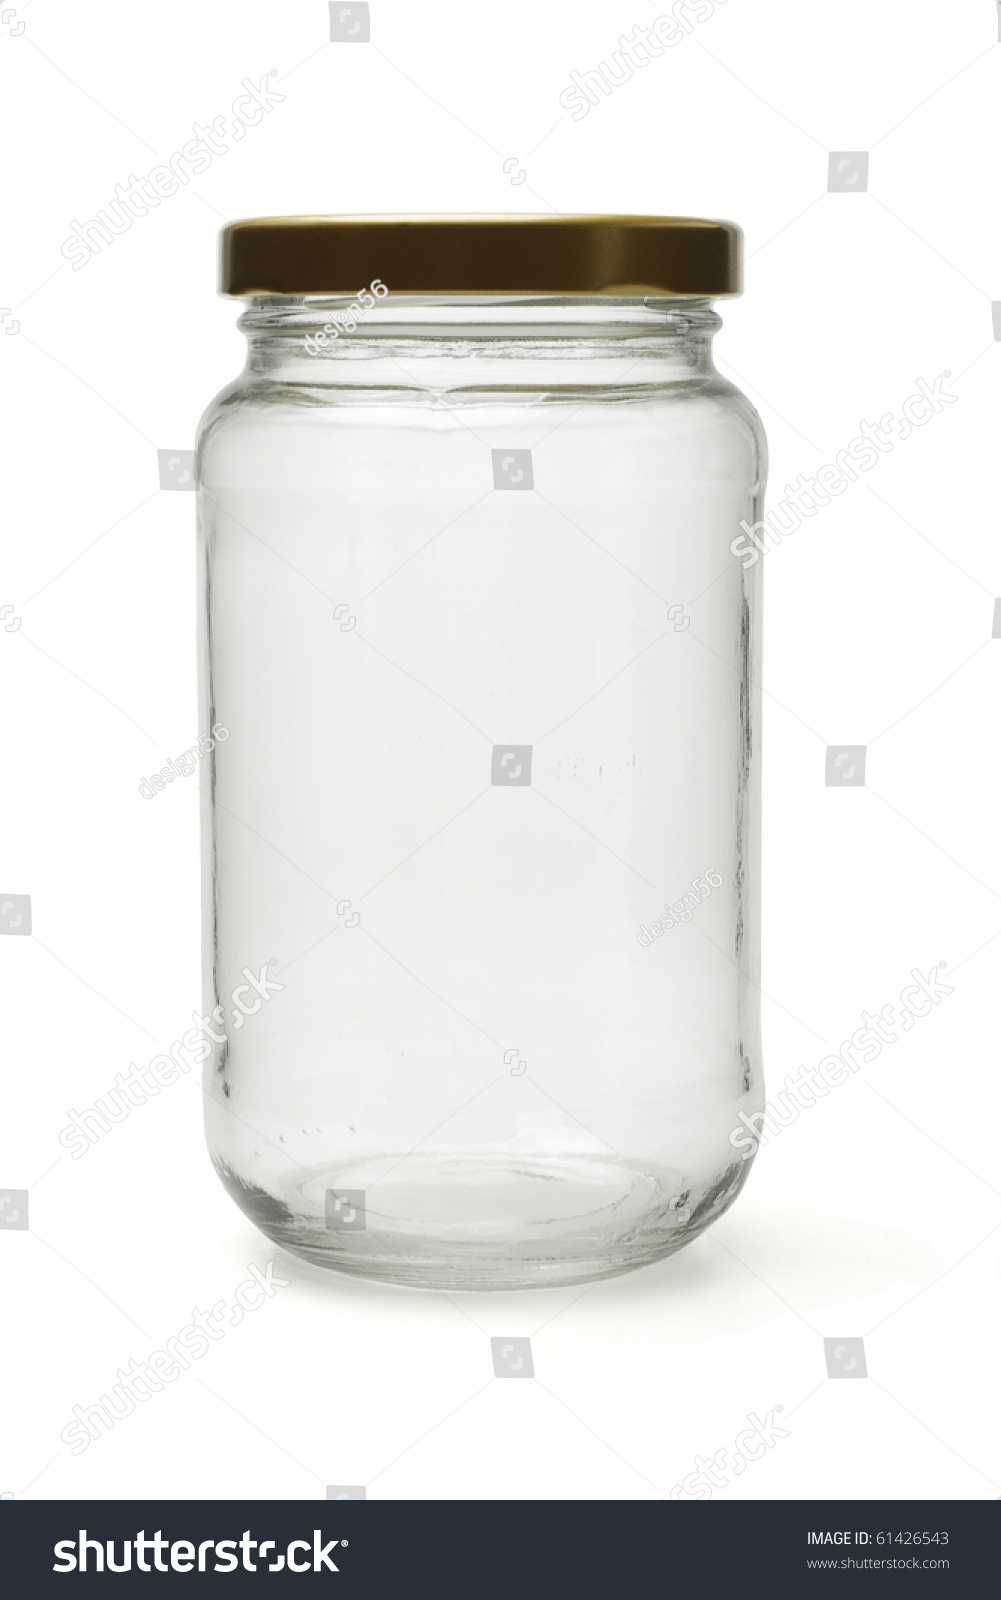 Empty glass bottle standing on white background #61426543